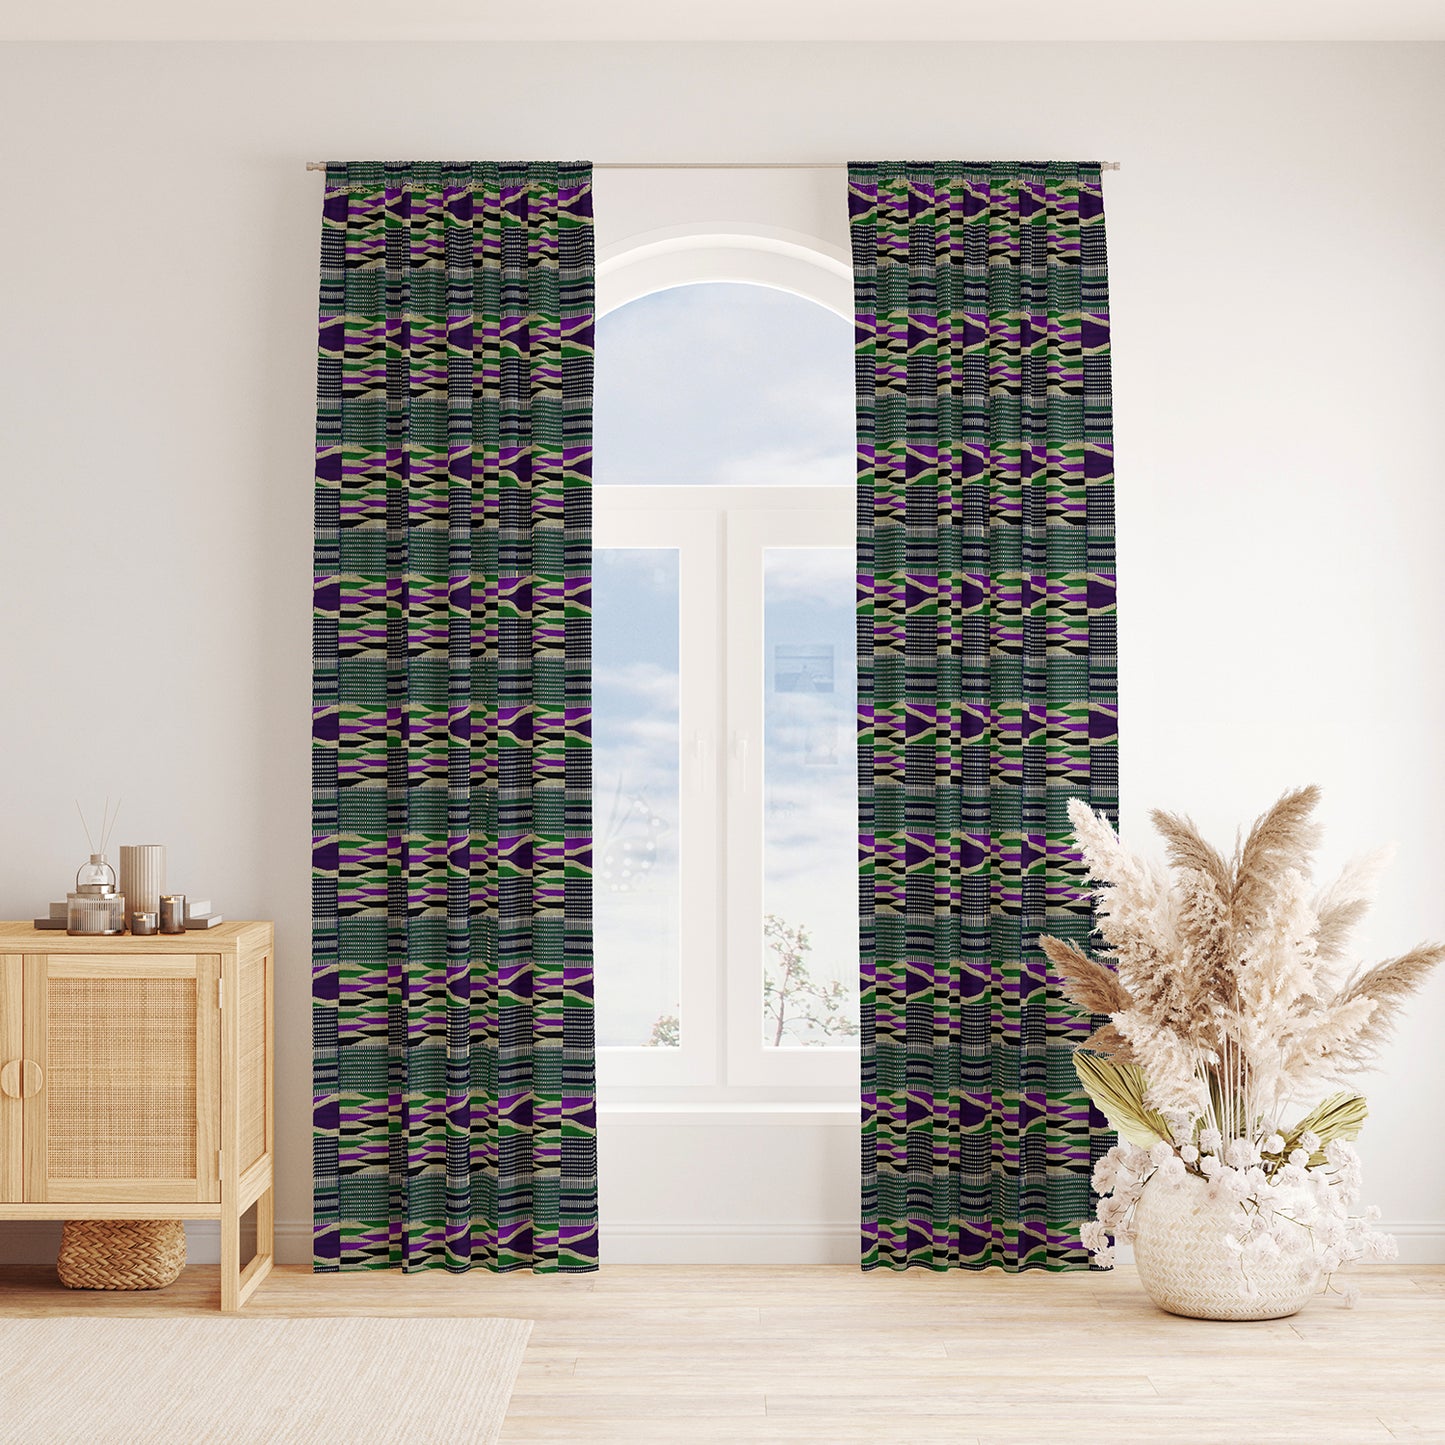 Boho Curtains in African Kente Cloth Inspired - Purple